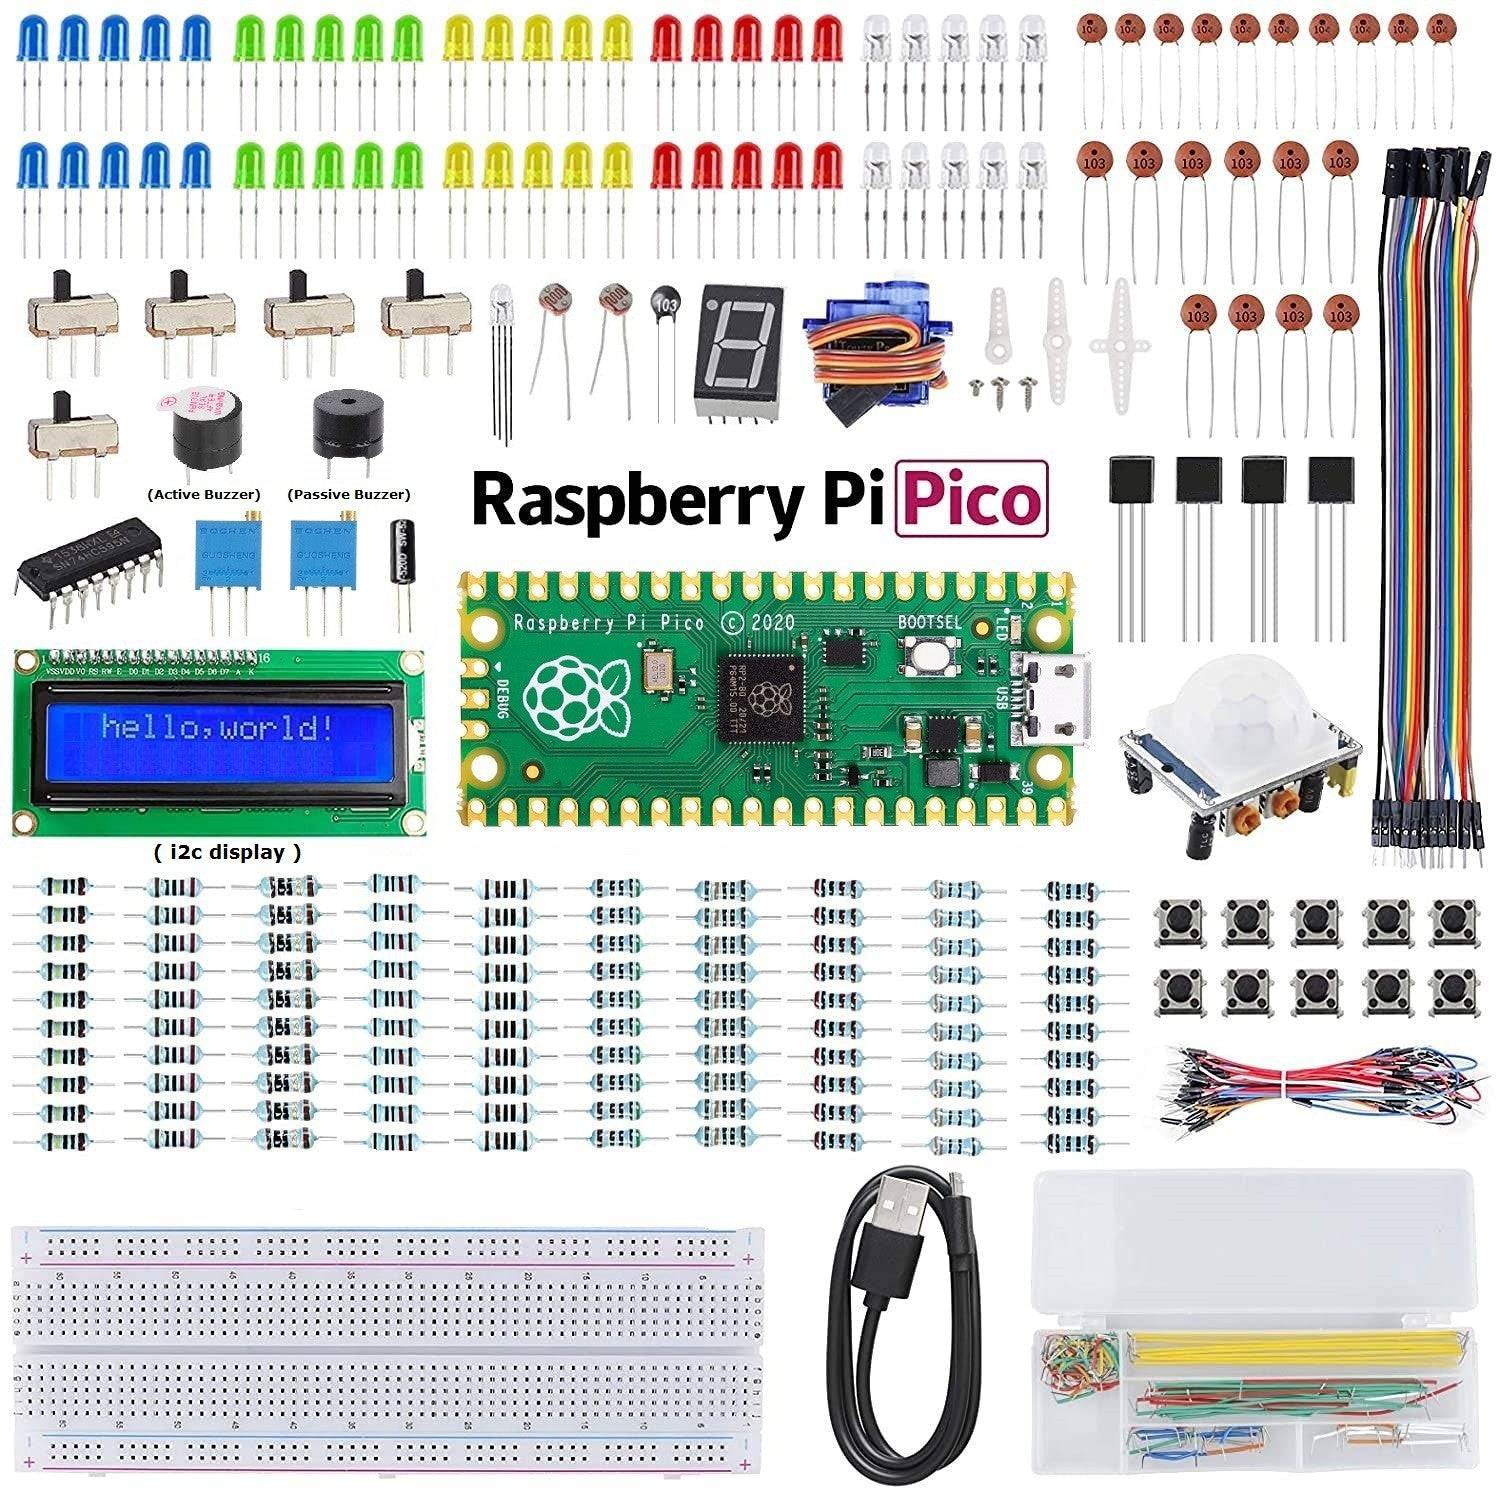 Raspberry Pi Pico Basic Starter Kit, One-Stop Learning Electronics and Programming - KT1289 - REES52